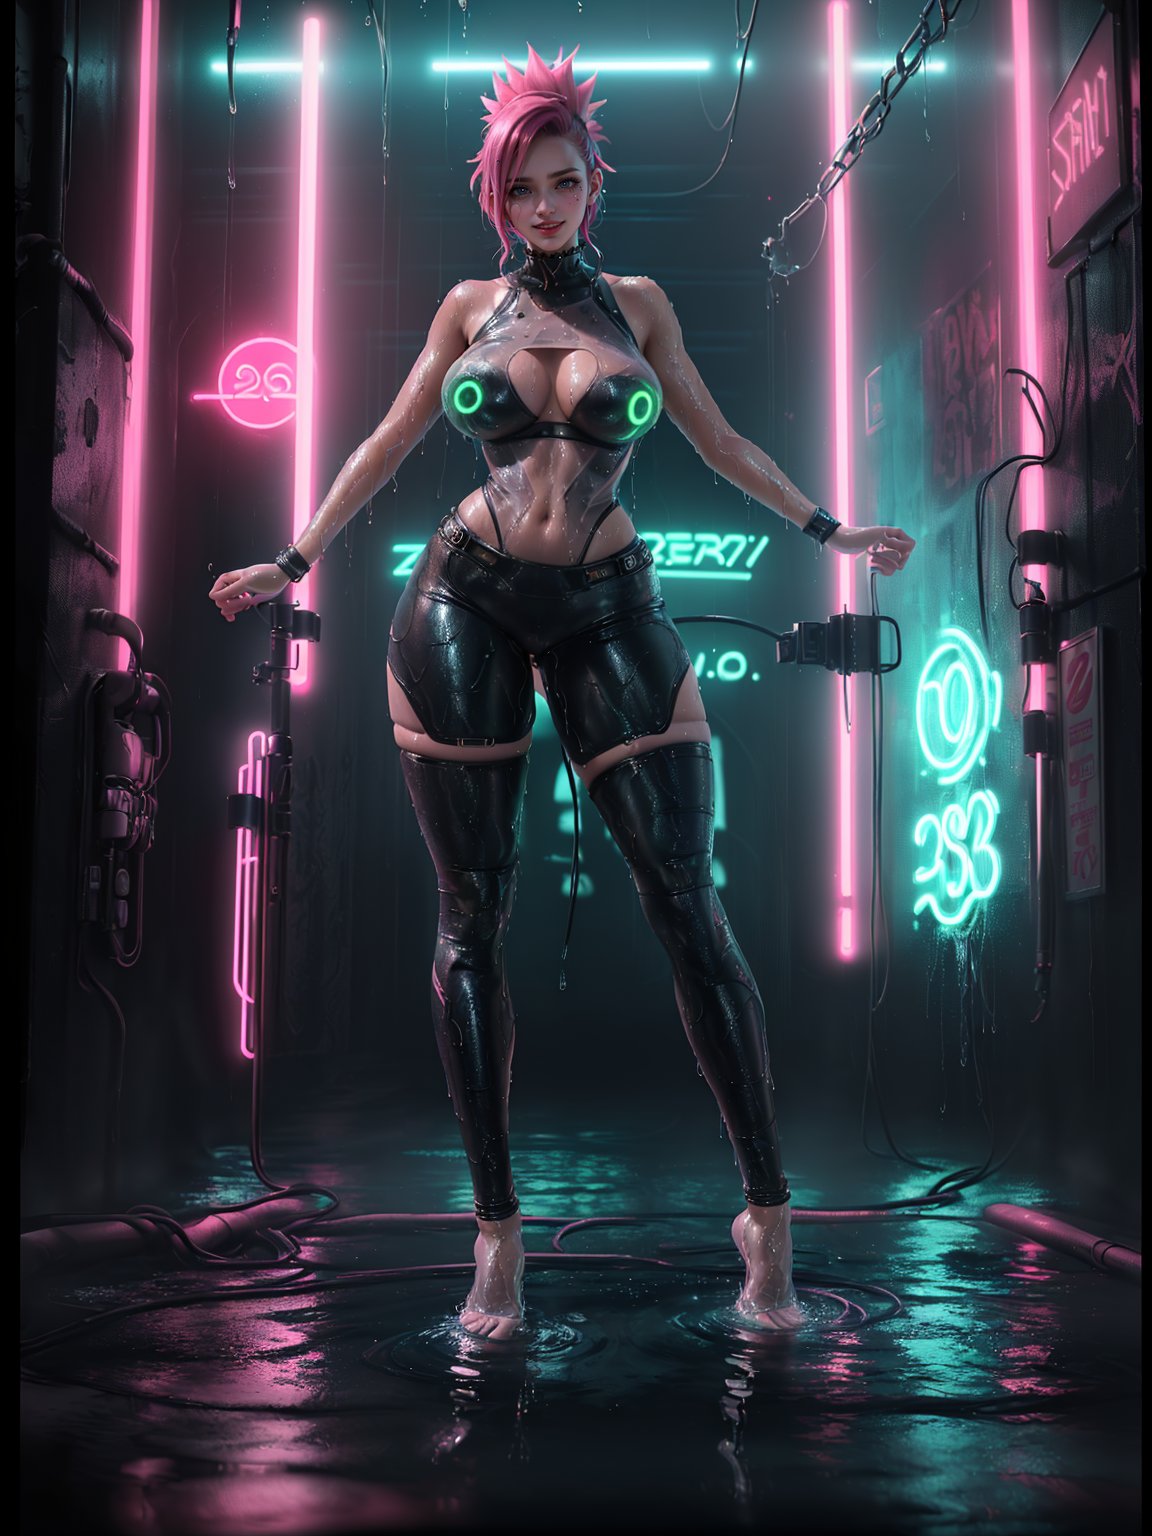 ((Full body):2) {((30 year old woman only):2)}:{((wearing black cyberpunk costume with neon lights extremely tight and tight-fitting, see-through costume):1.5), (( extremely large breasts):1.5), only she has ((very short mohawk pink hair, green eyes):1.5), ((looking at viewer, maniacal smile):1.5), She has ((whole body/attire drenched in water):1.4) she is doing ((erotic pose):1.5)}; {Background:In a futuristic city raining heavily, she is in front of a(futuristic car traffic):1.5)}, Hyperrealism, 16k, ((best quality, high details):1.4), anatomically correct, masterpiece , UHD